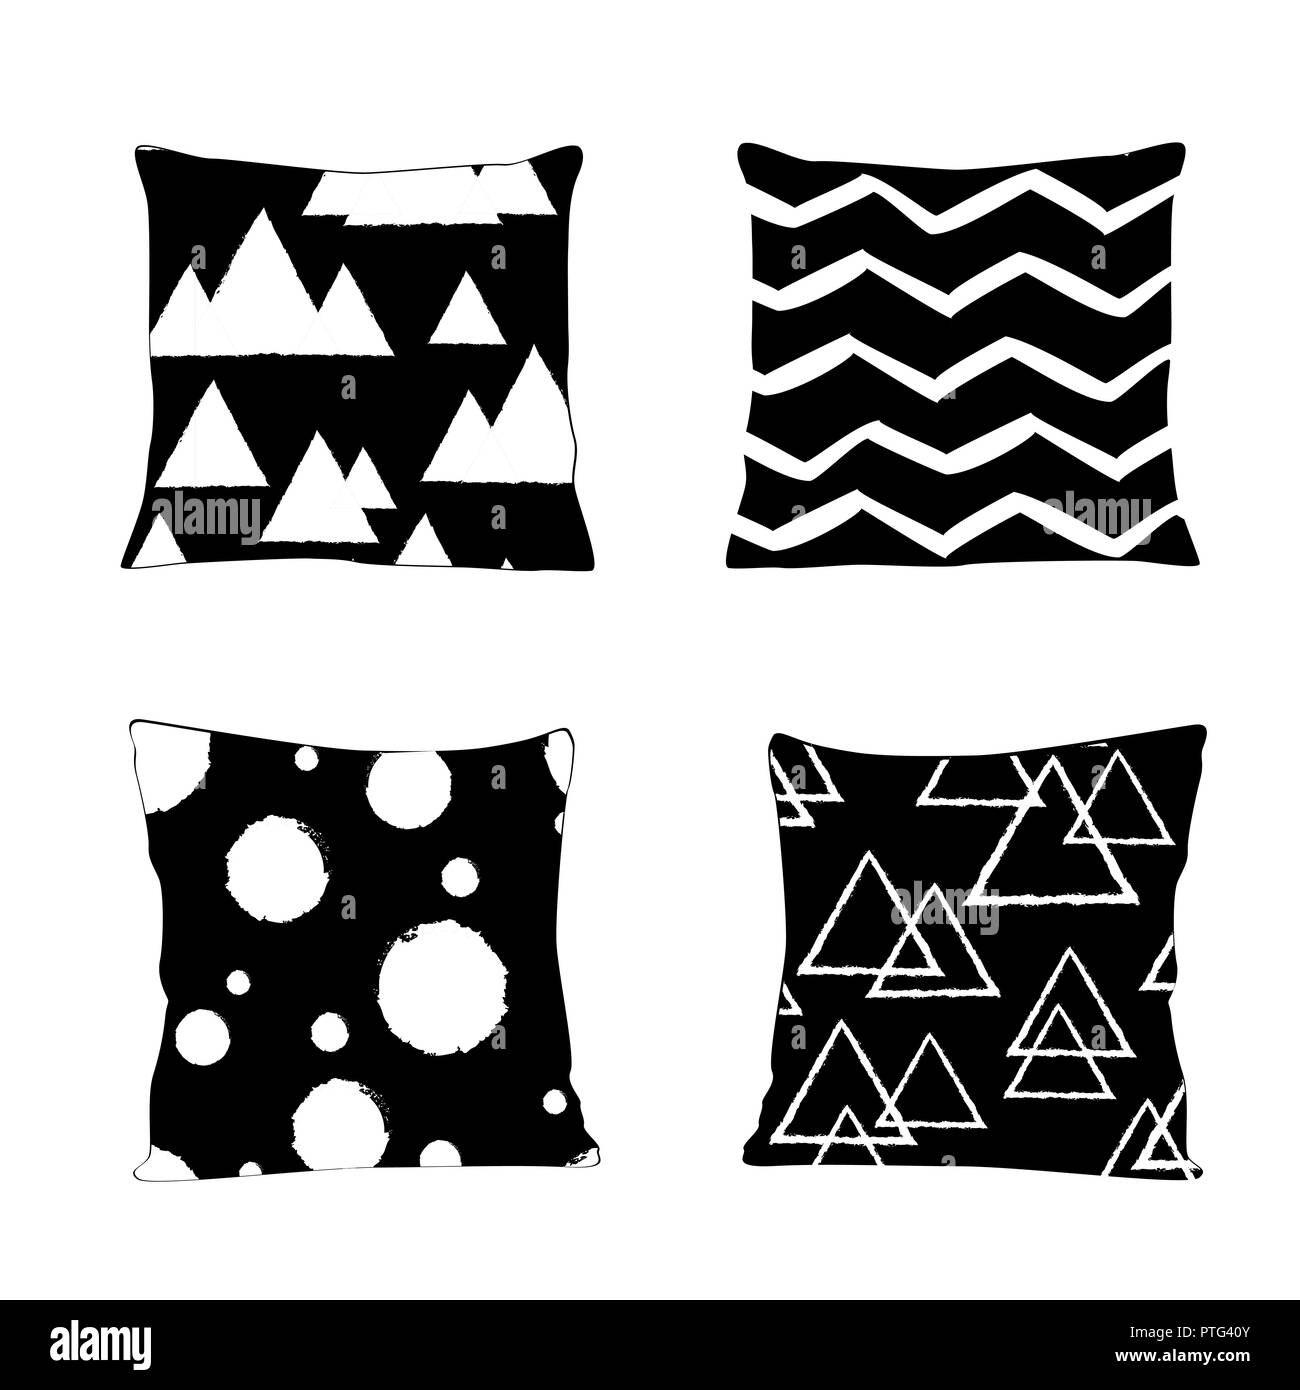 Realistic pillow models with different geometric prints and patterns in black and white colors. Apartment interior design elements. Scandinavian style Stock Vector